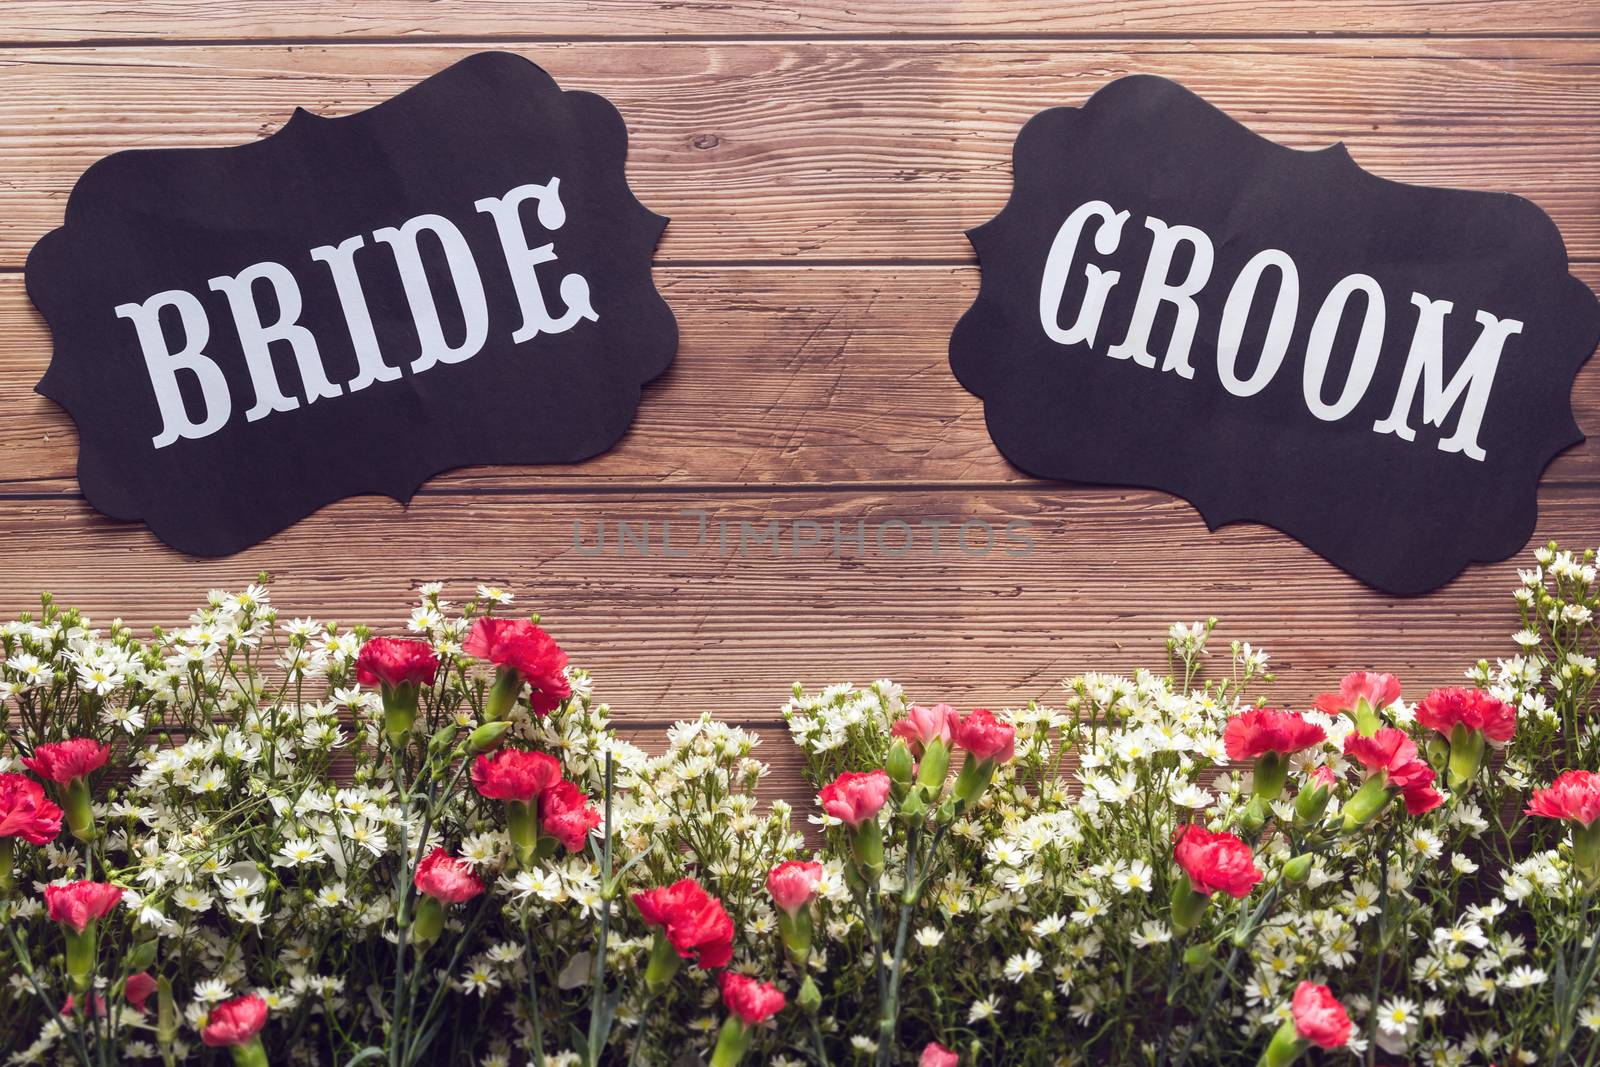 Bride and Groom text sign on wooden background decorated with flower, vintage style. wedding invitation and greeting card